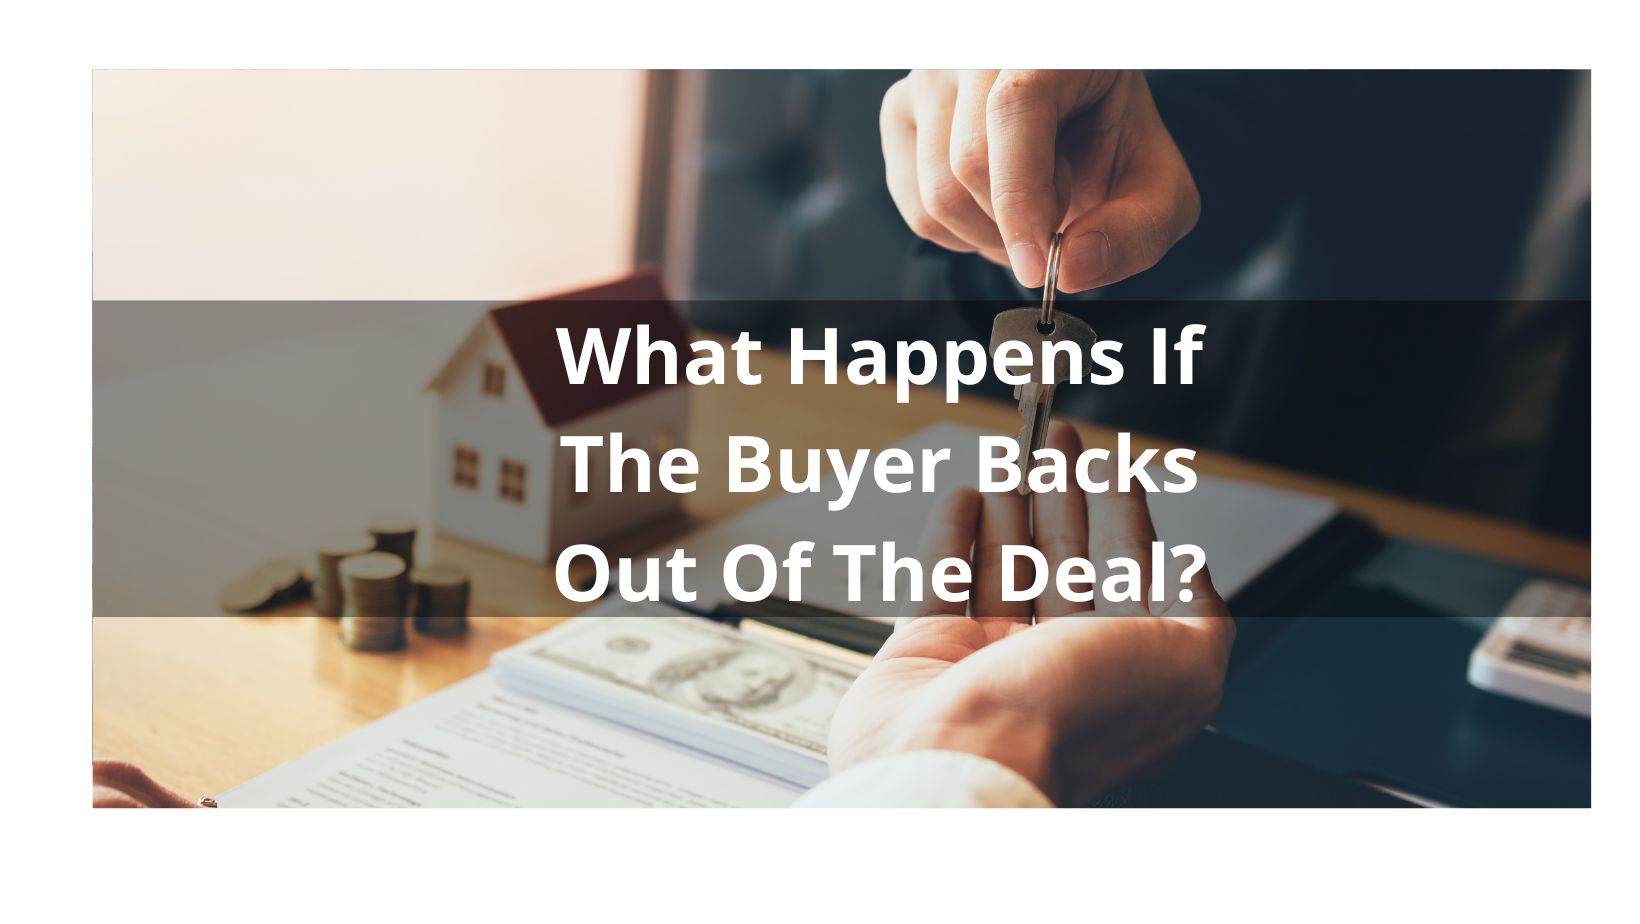 What Happens If The Buyer Backs Out Of The Deal?